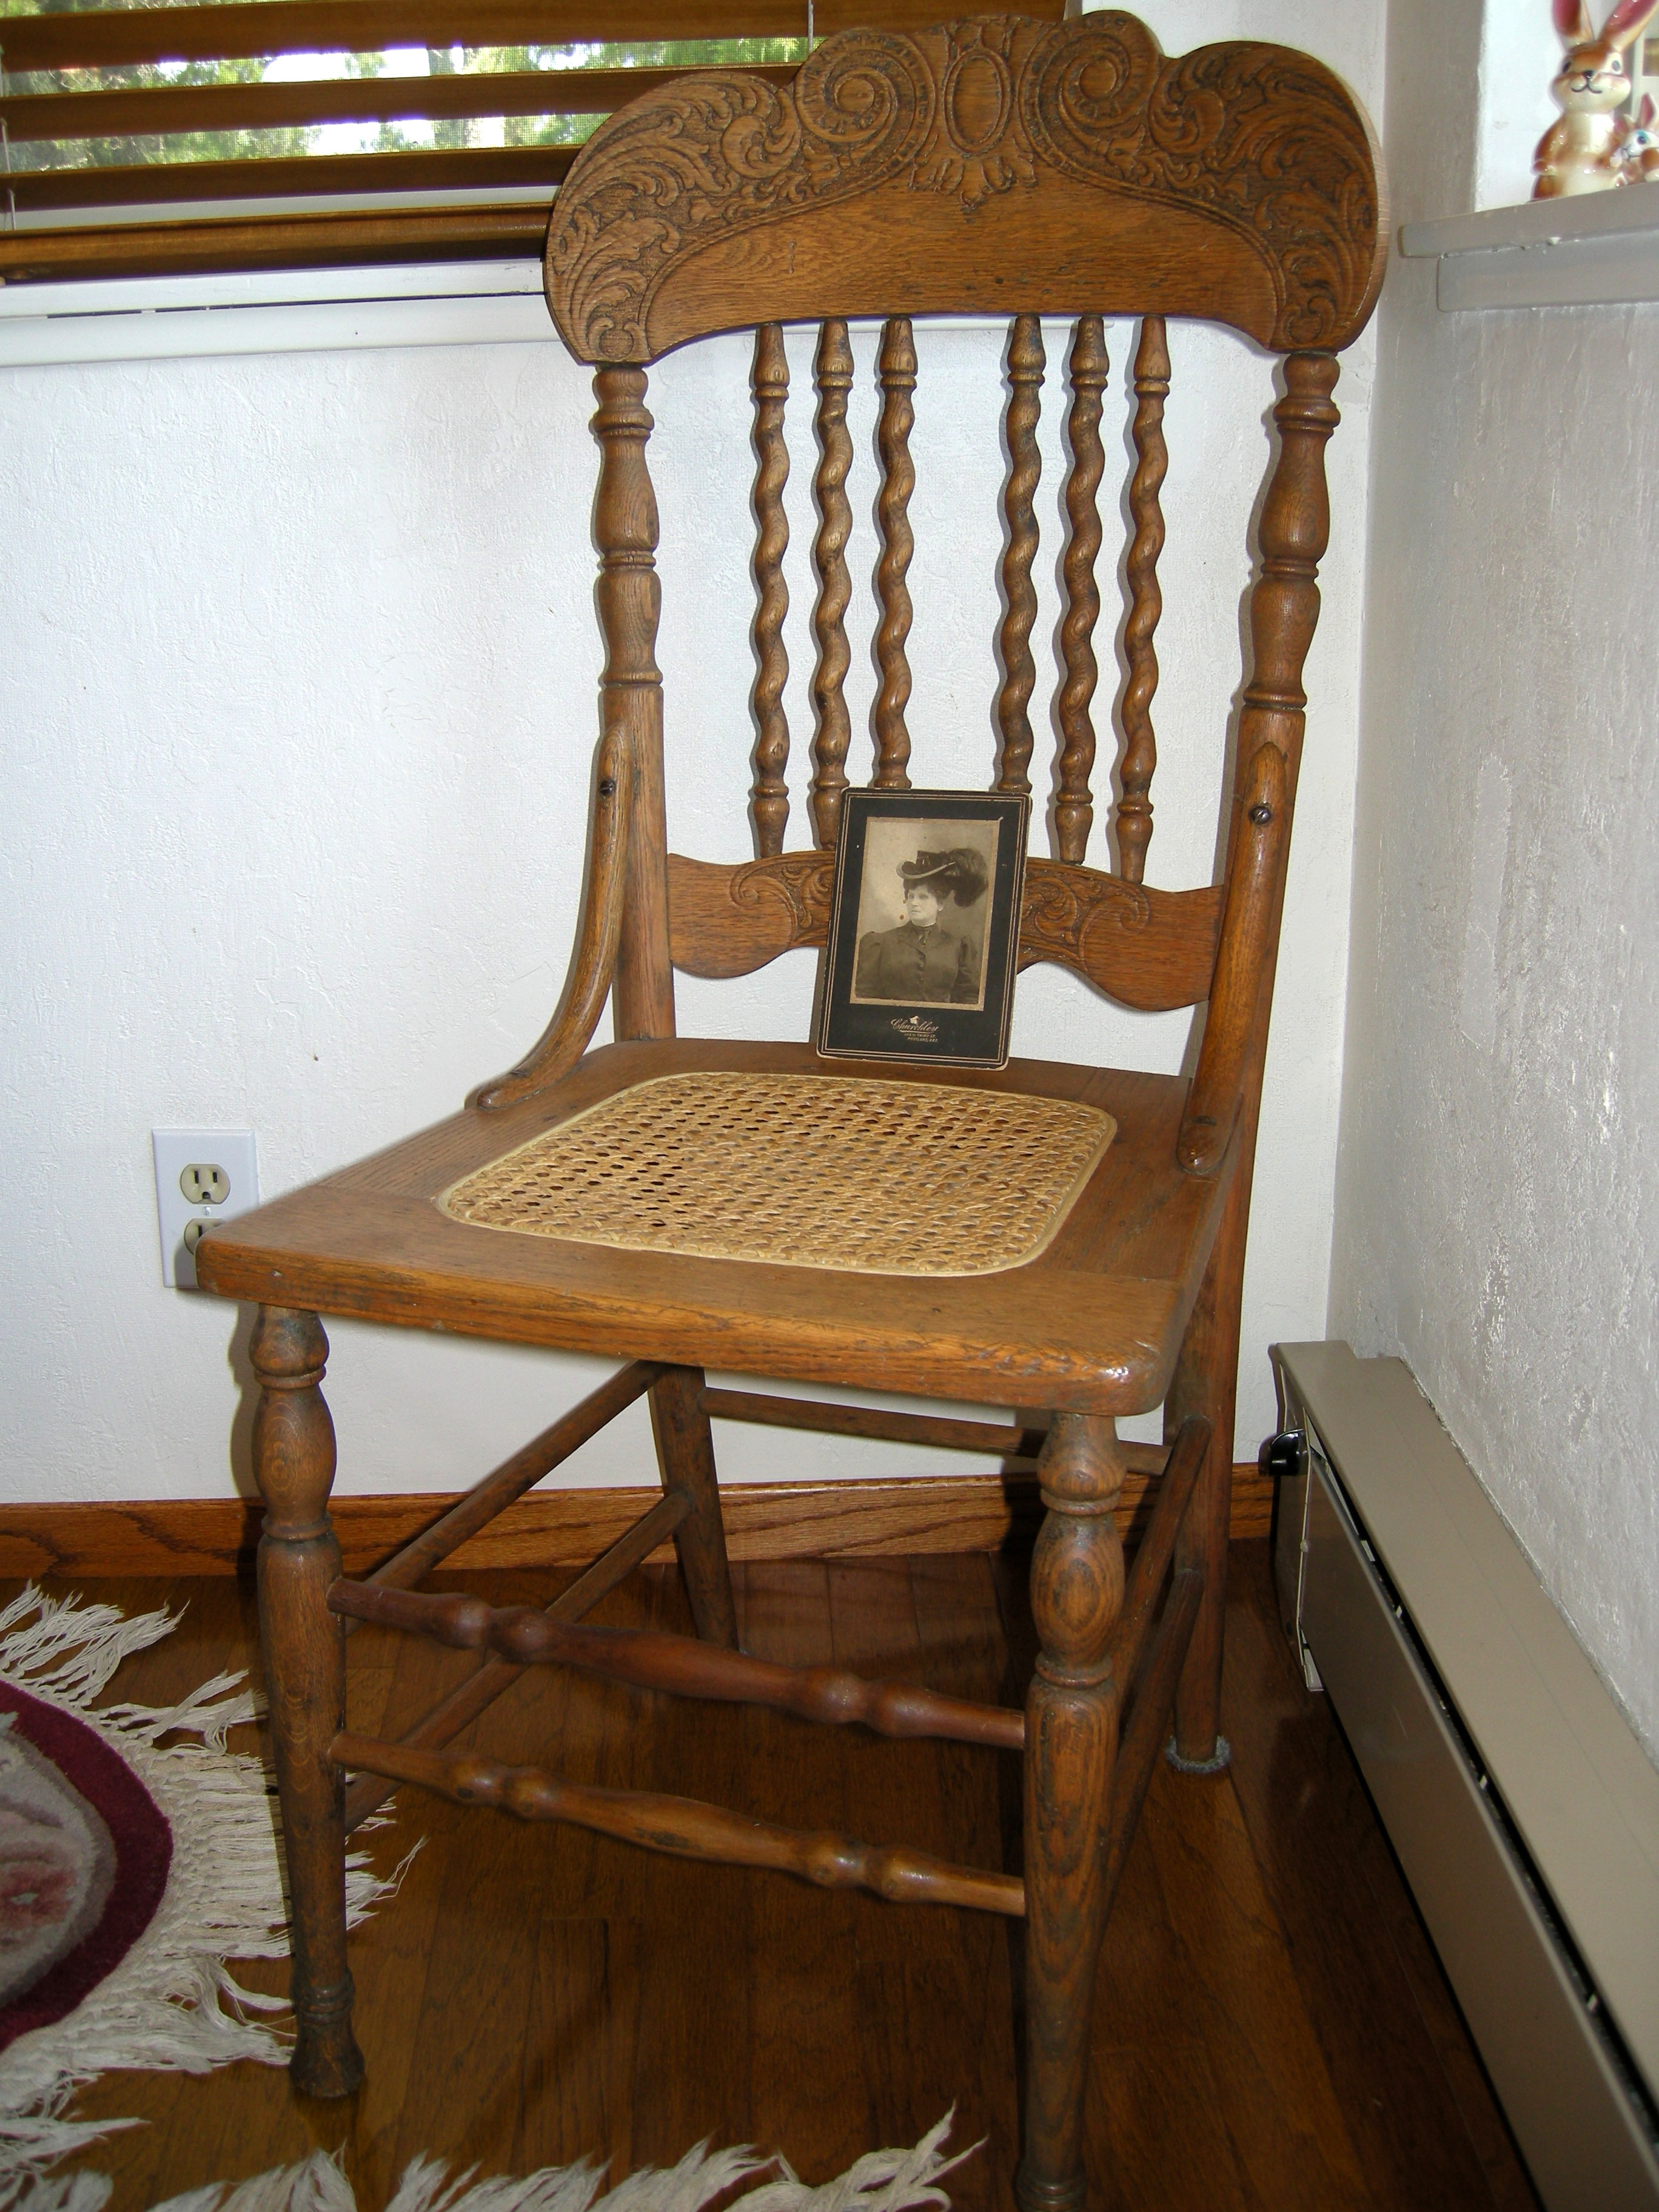 WOODEN SIDE CHAIR, MARY MCINTYRE